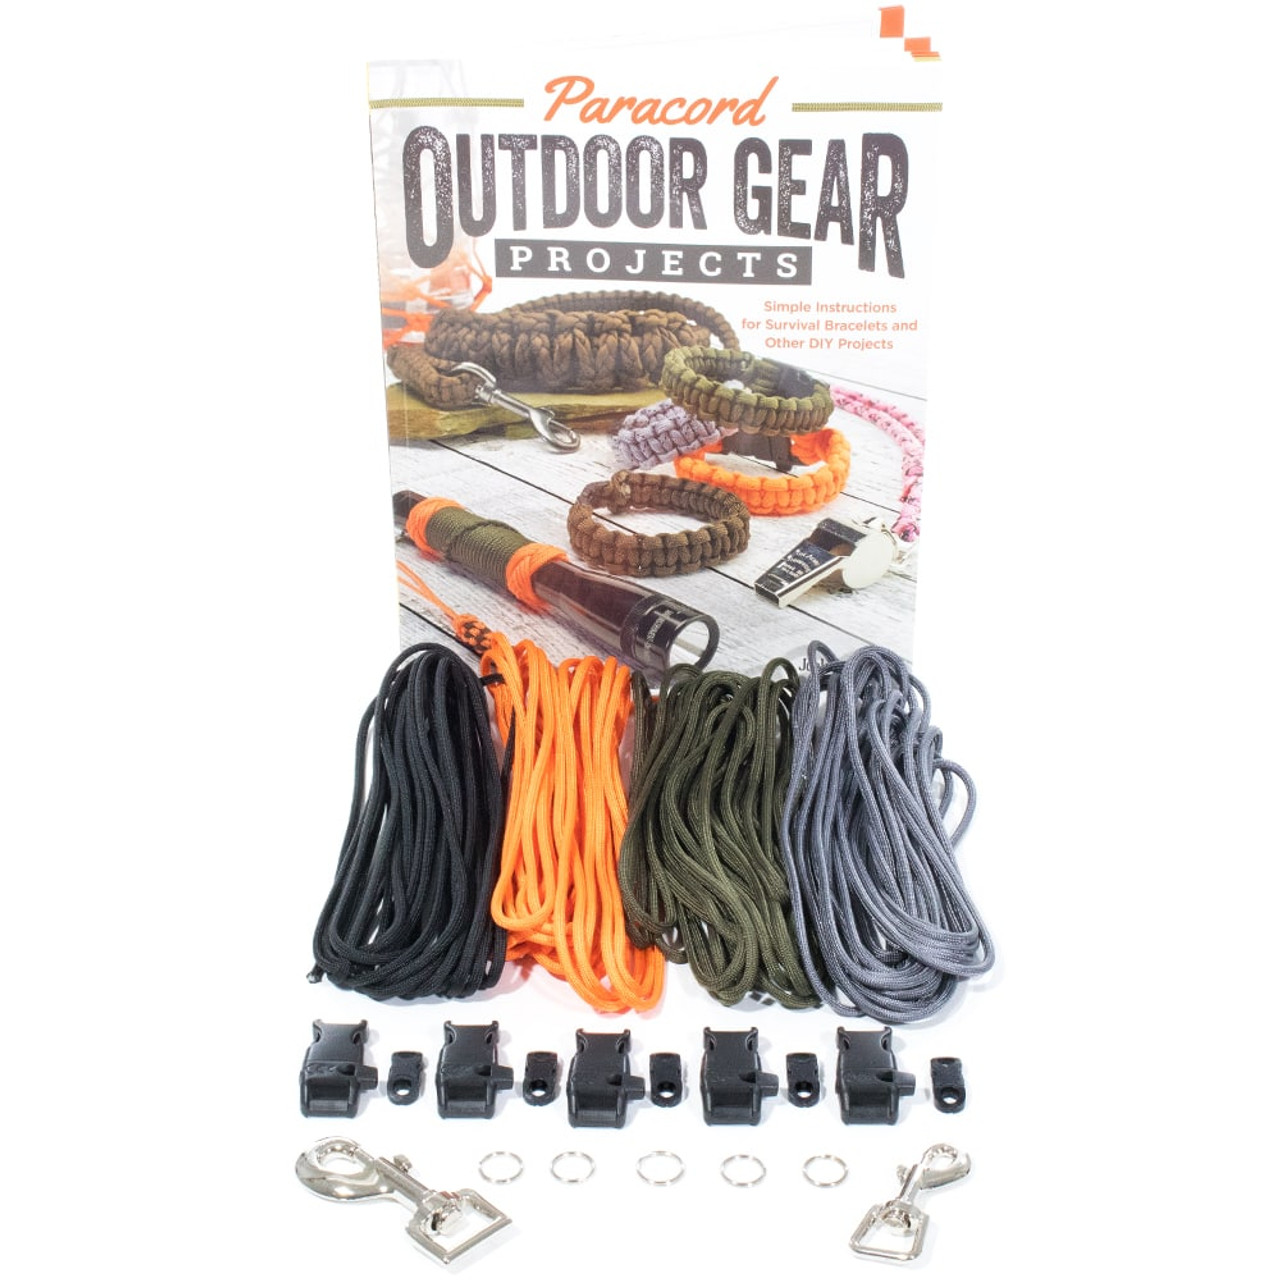 Paracord Project Outdoor Gear Book-Bk & Kit